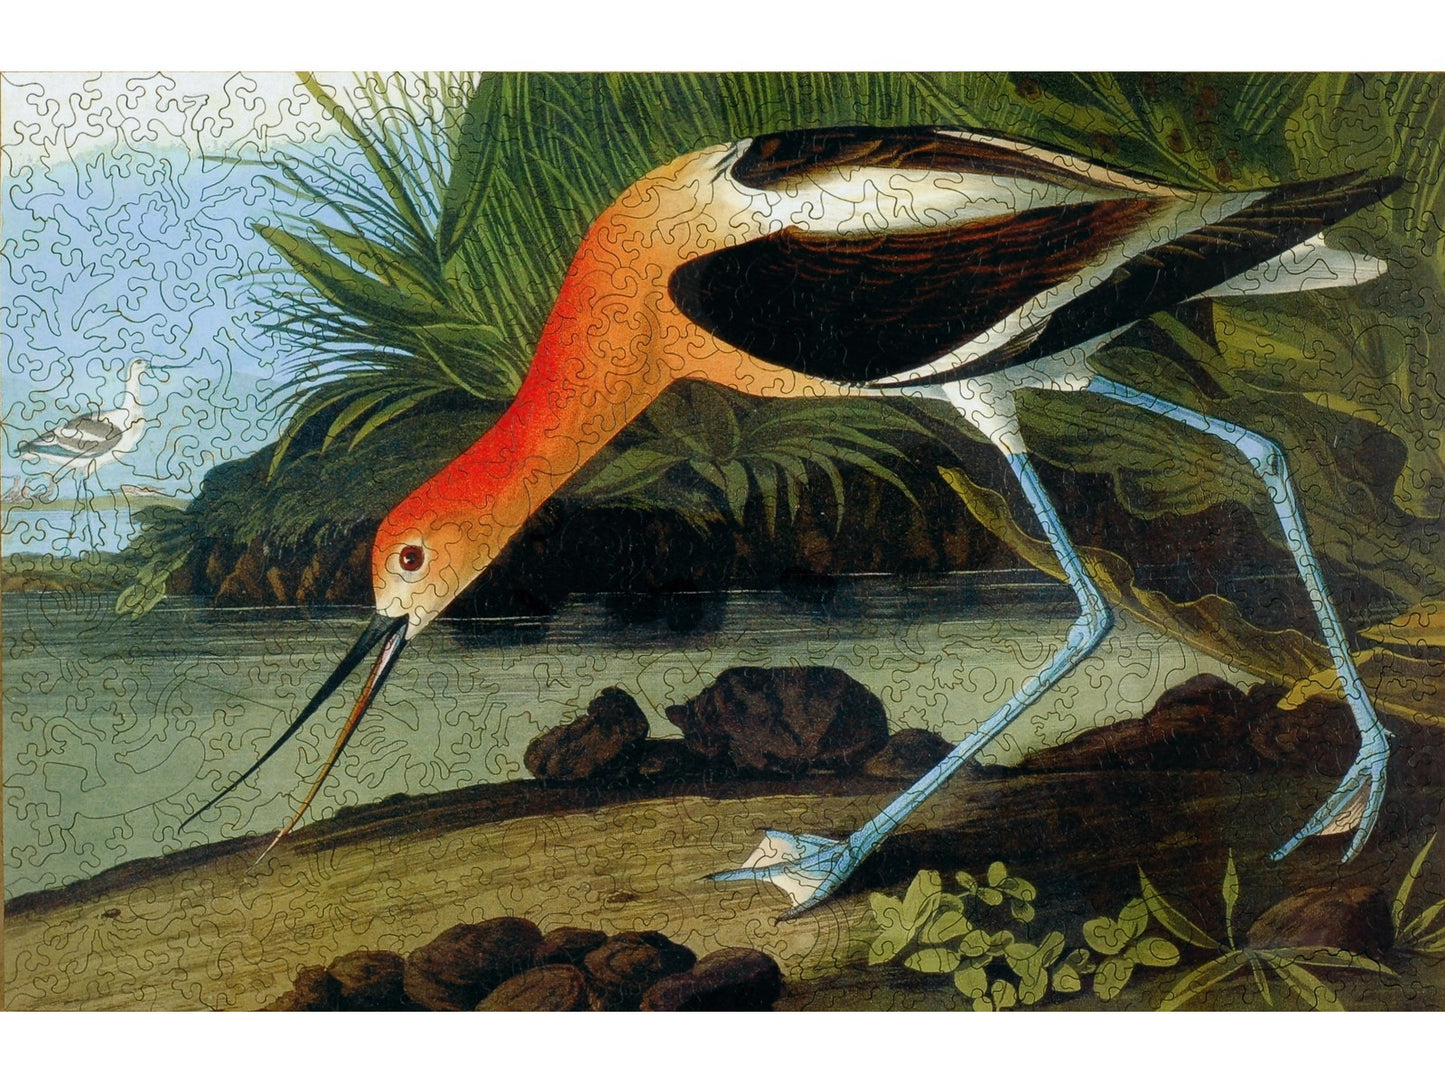 The front of the puzzle, American Avocet, which shows an orange and white bird with blue legs in its natural surroundings.